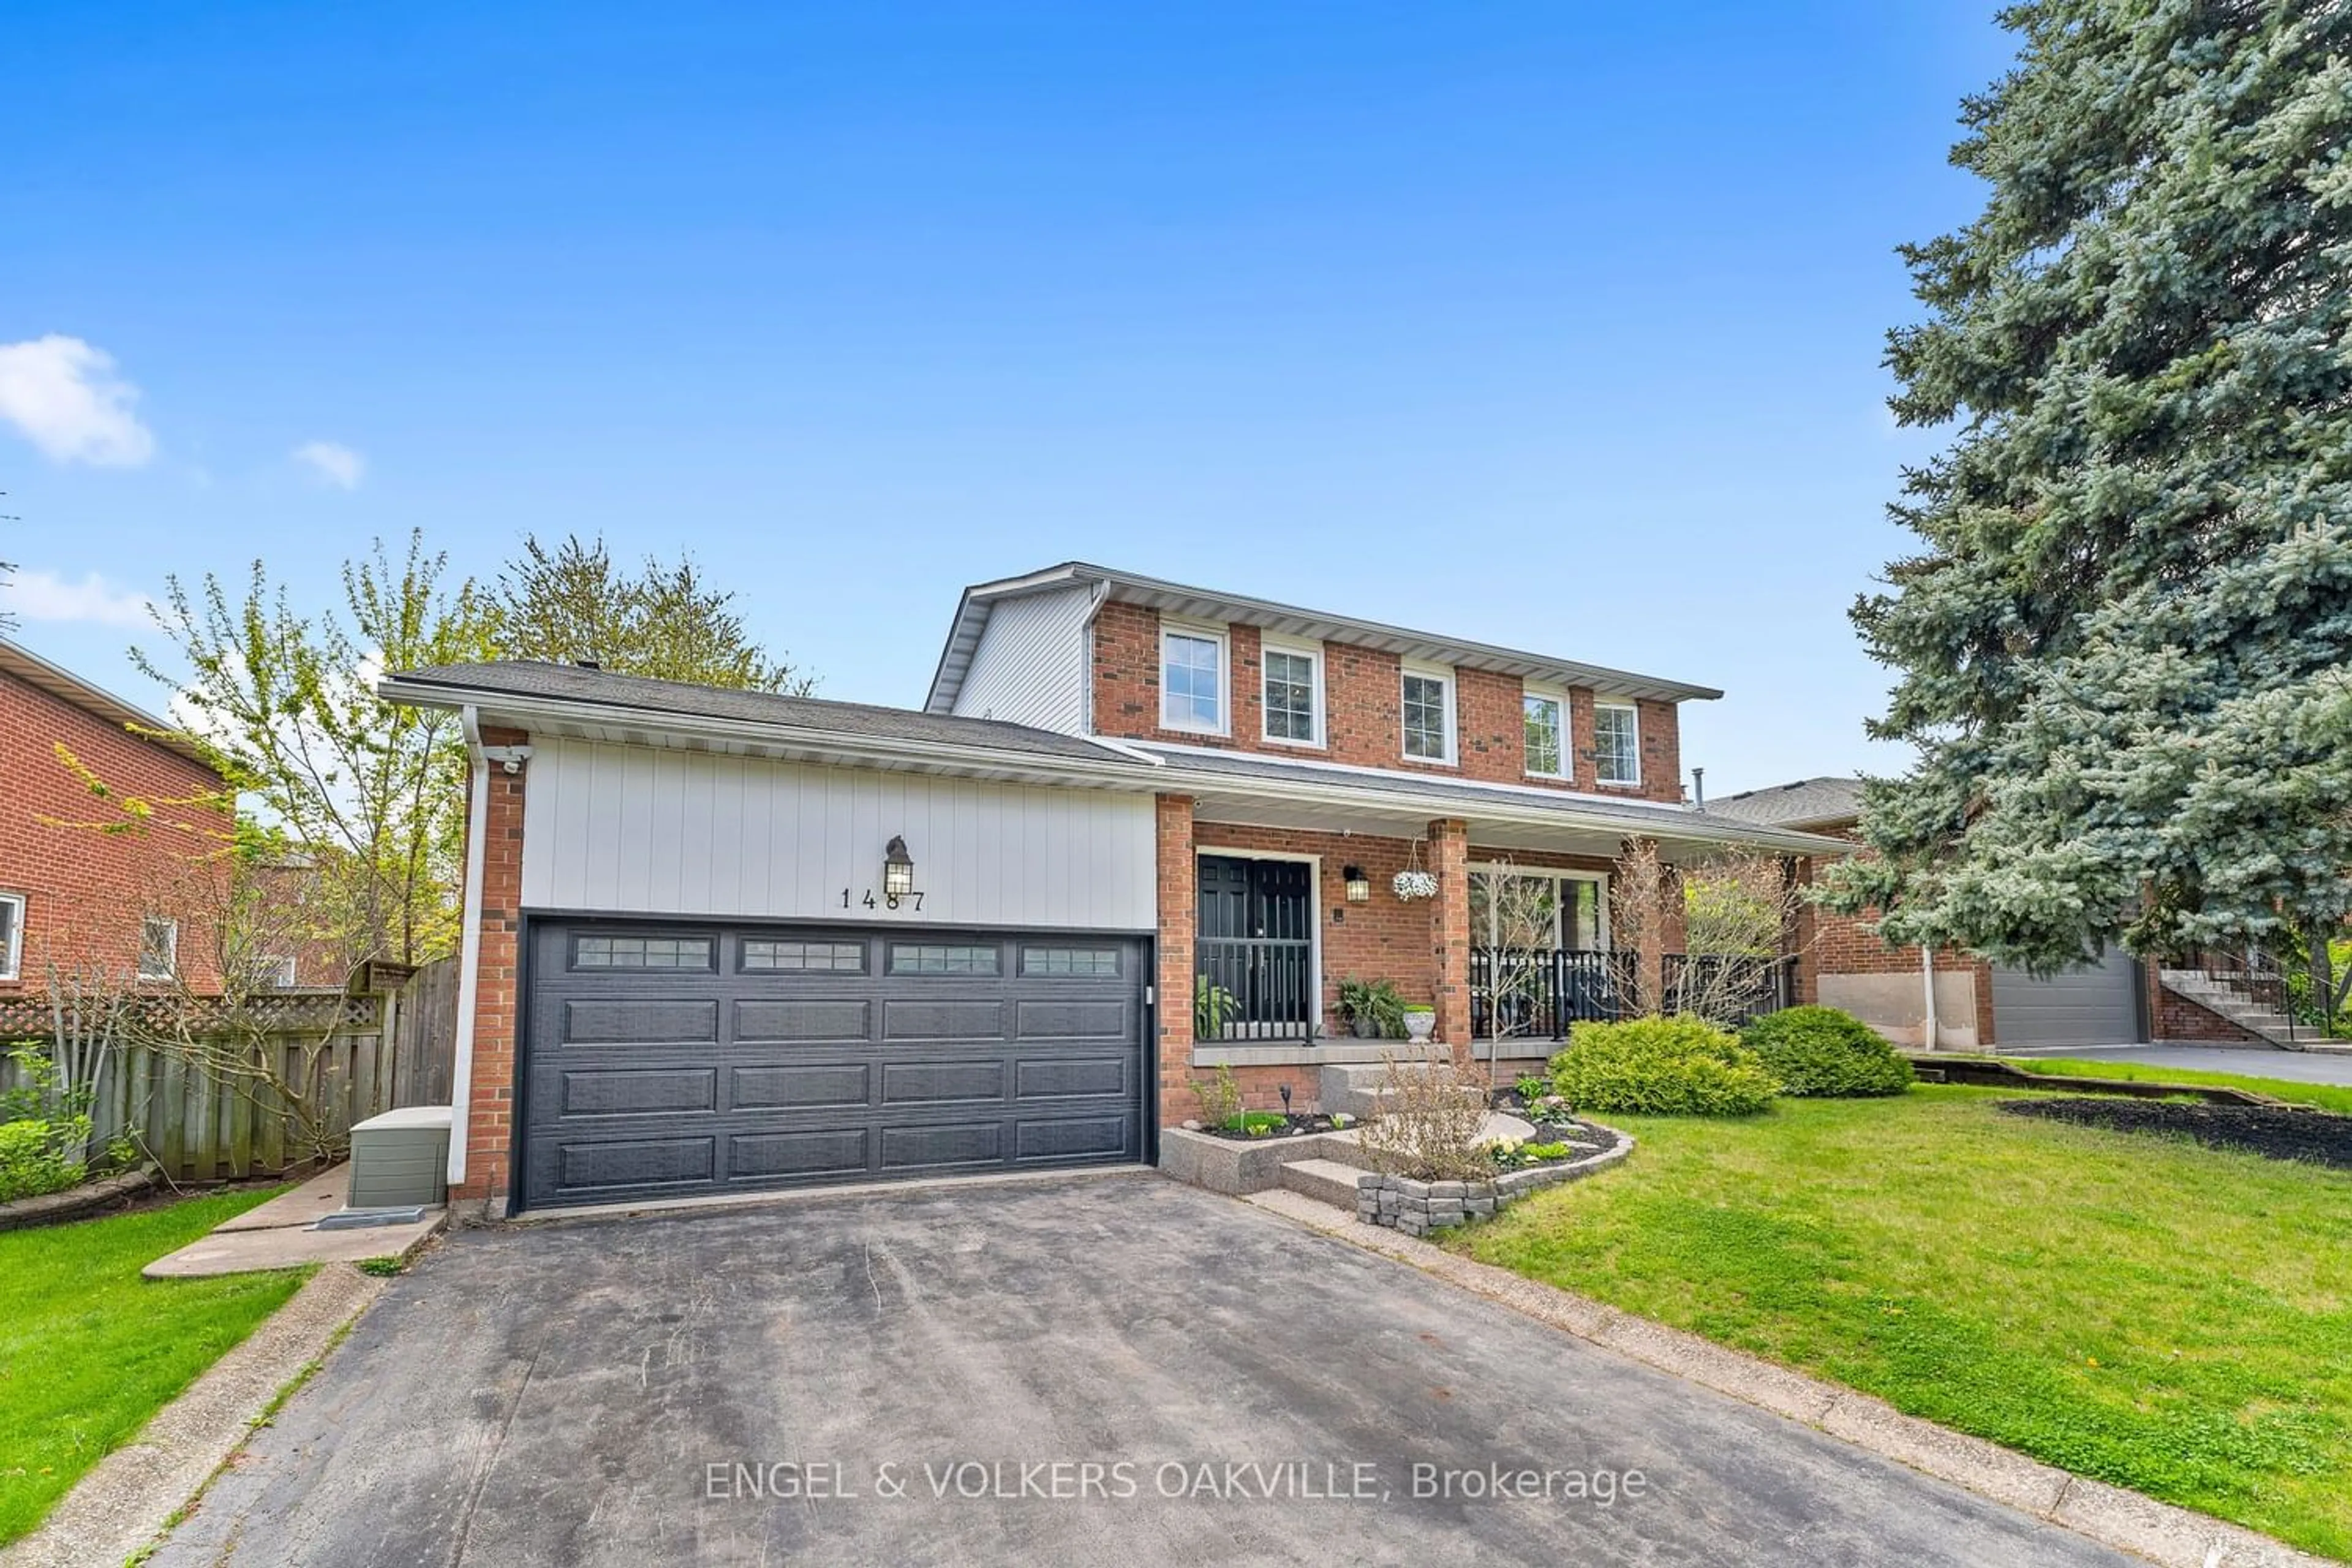 Home with brick exterior material for 1487 Grand Blvd, Oakville Ontario L6H 3E4